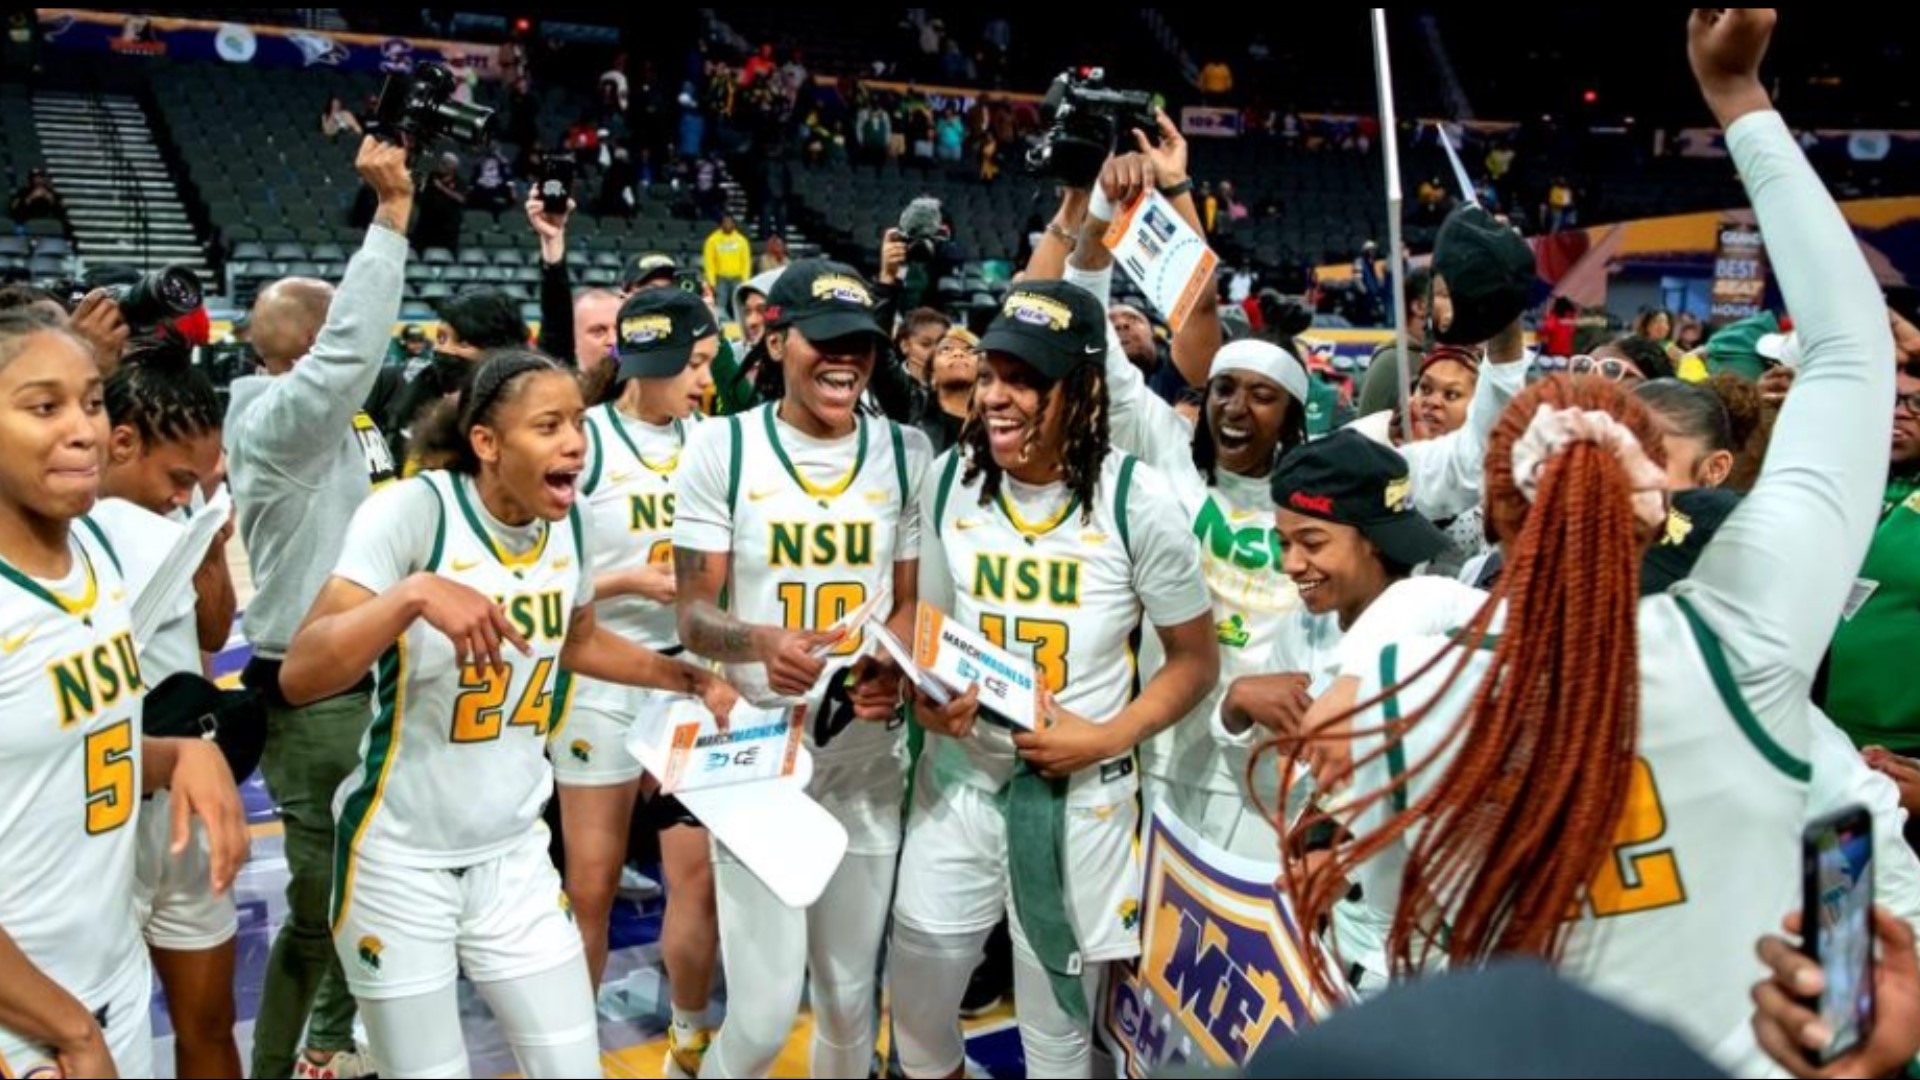 Norfolk State ends 21-year drought to claim first title since 2002